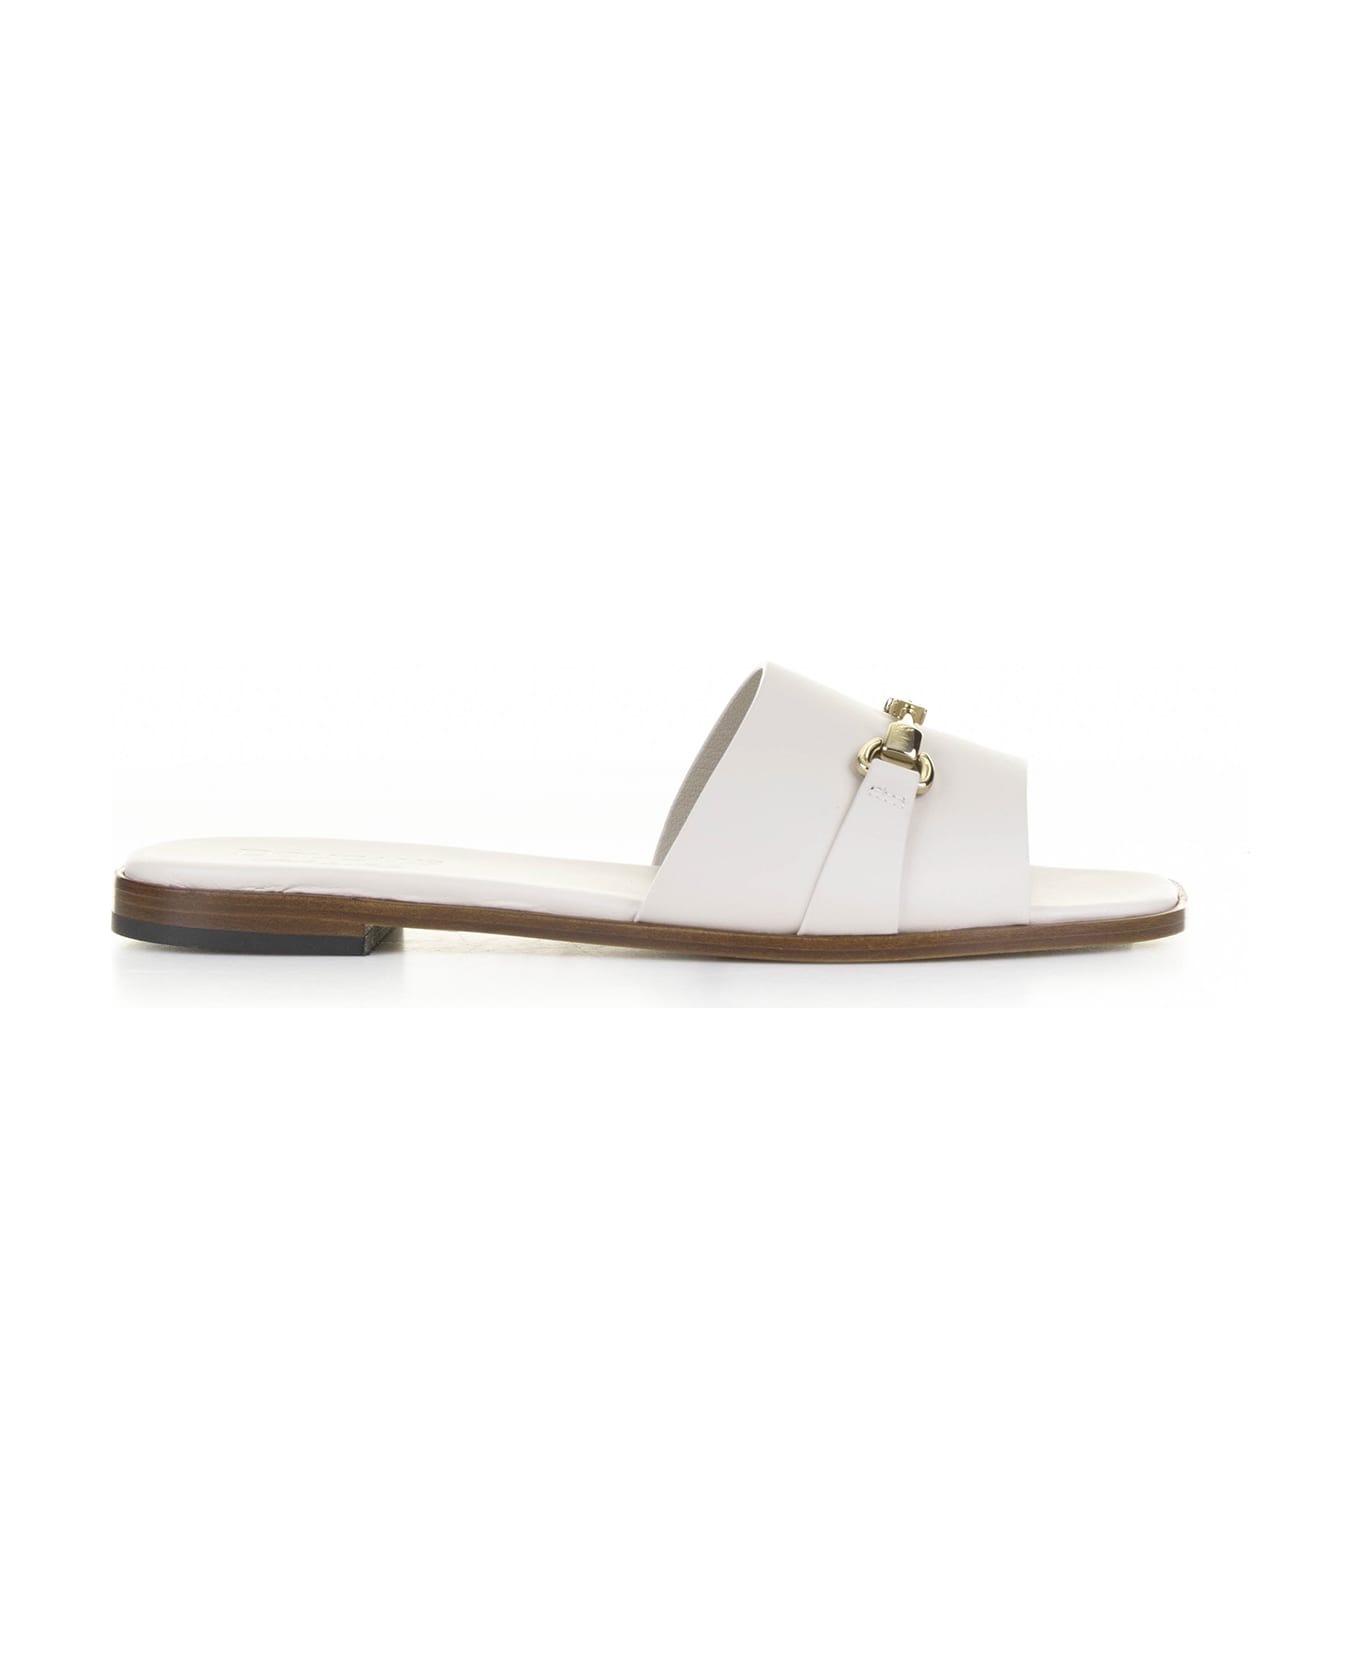 Doucal's White Leather Slipper With Horsebit - GESSO サンダル